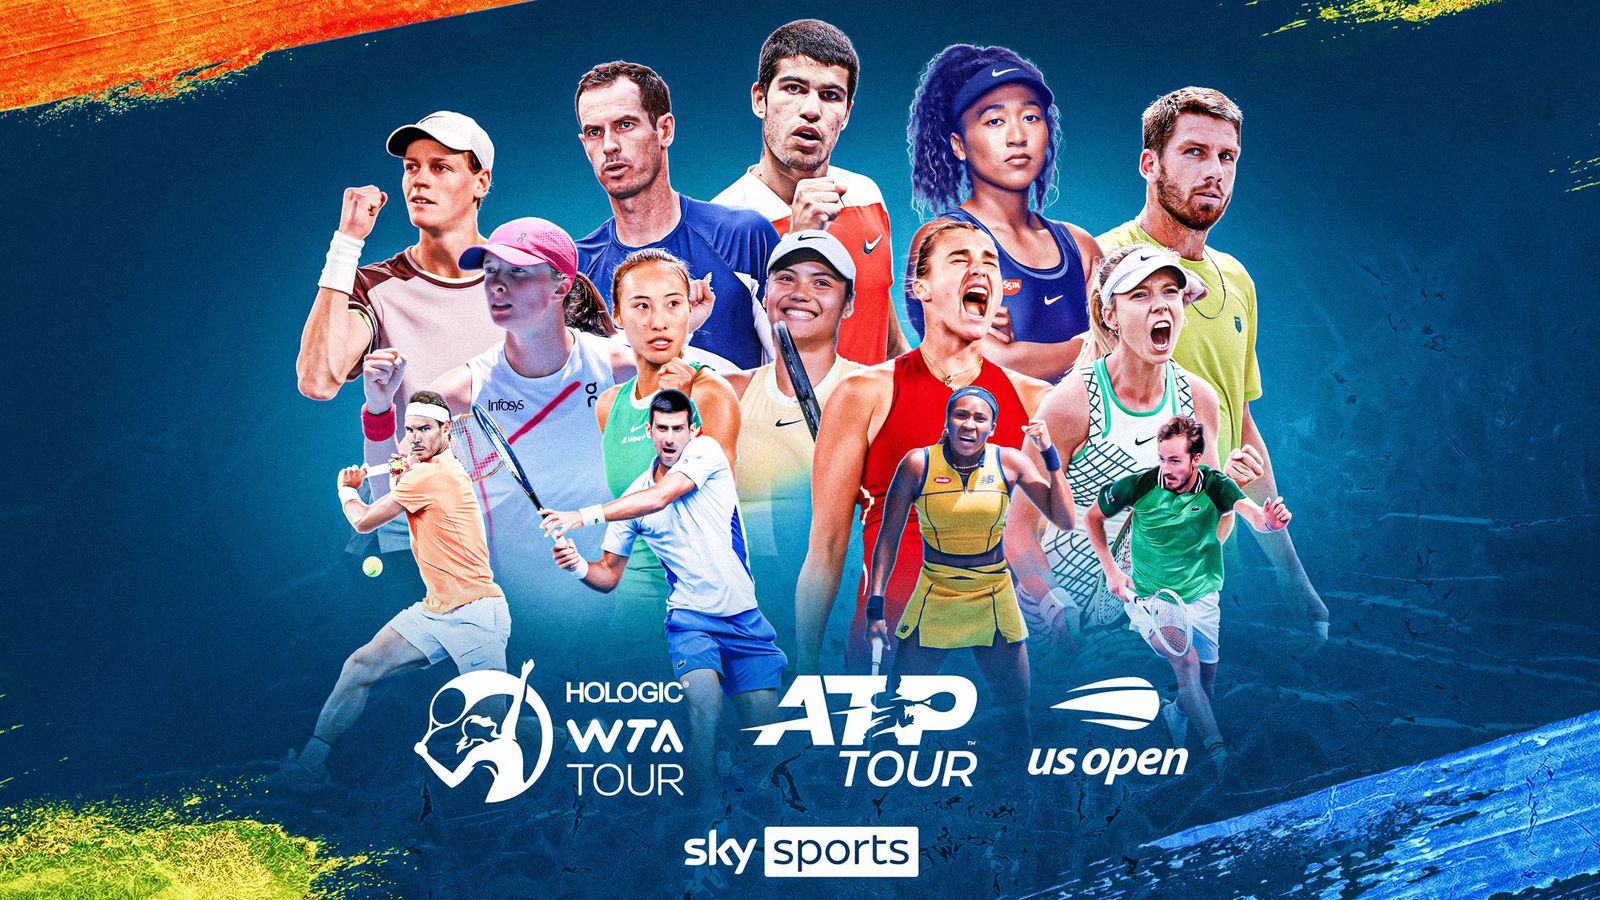 Sky Sports Tennis: Channel launching on February 11 as home of ATP, WTA Tours and US Open in UK and Ireland